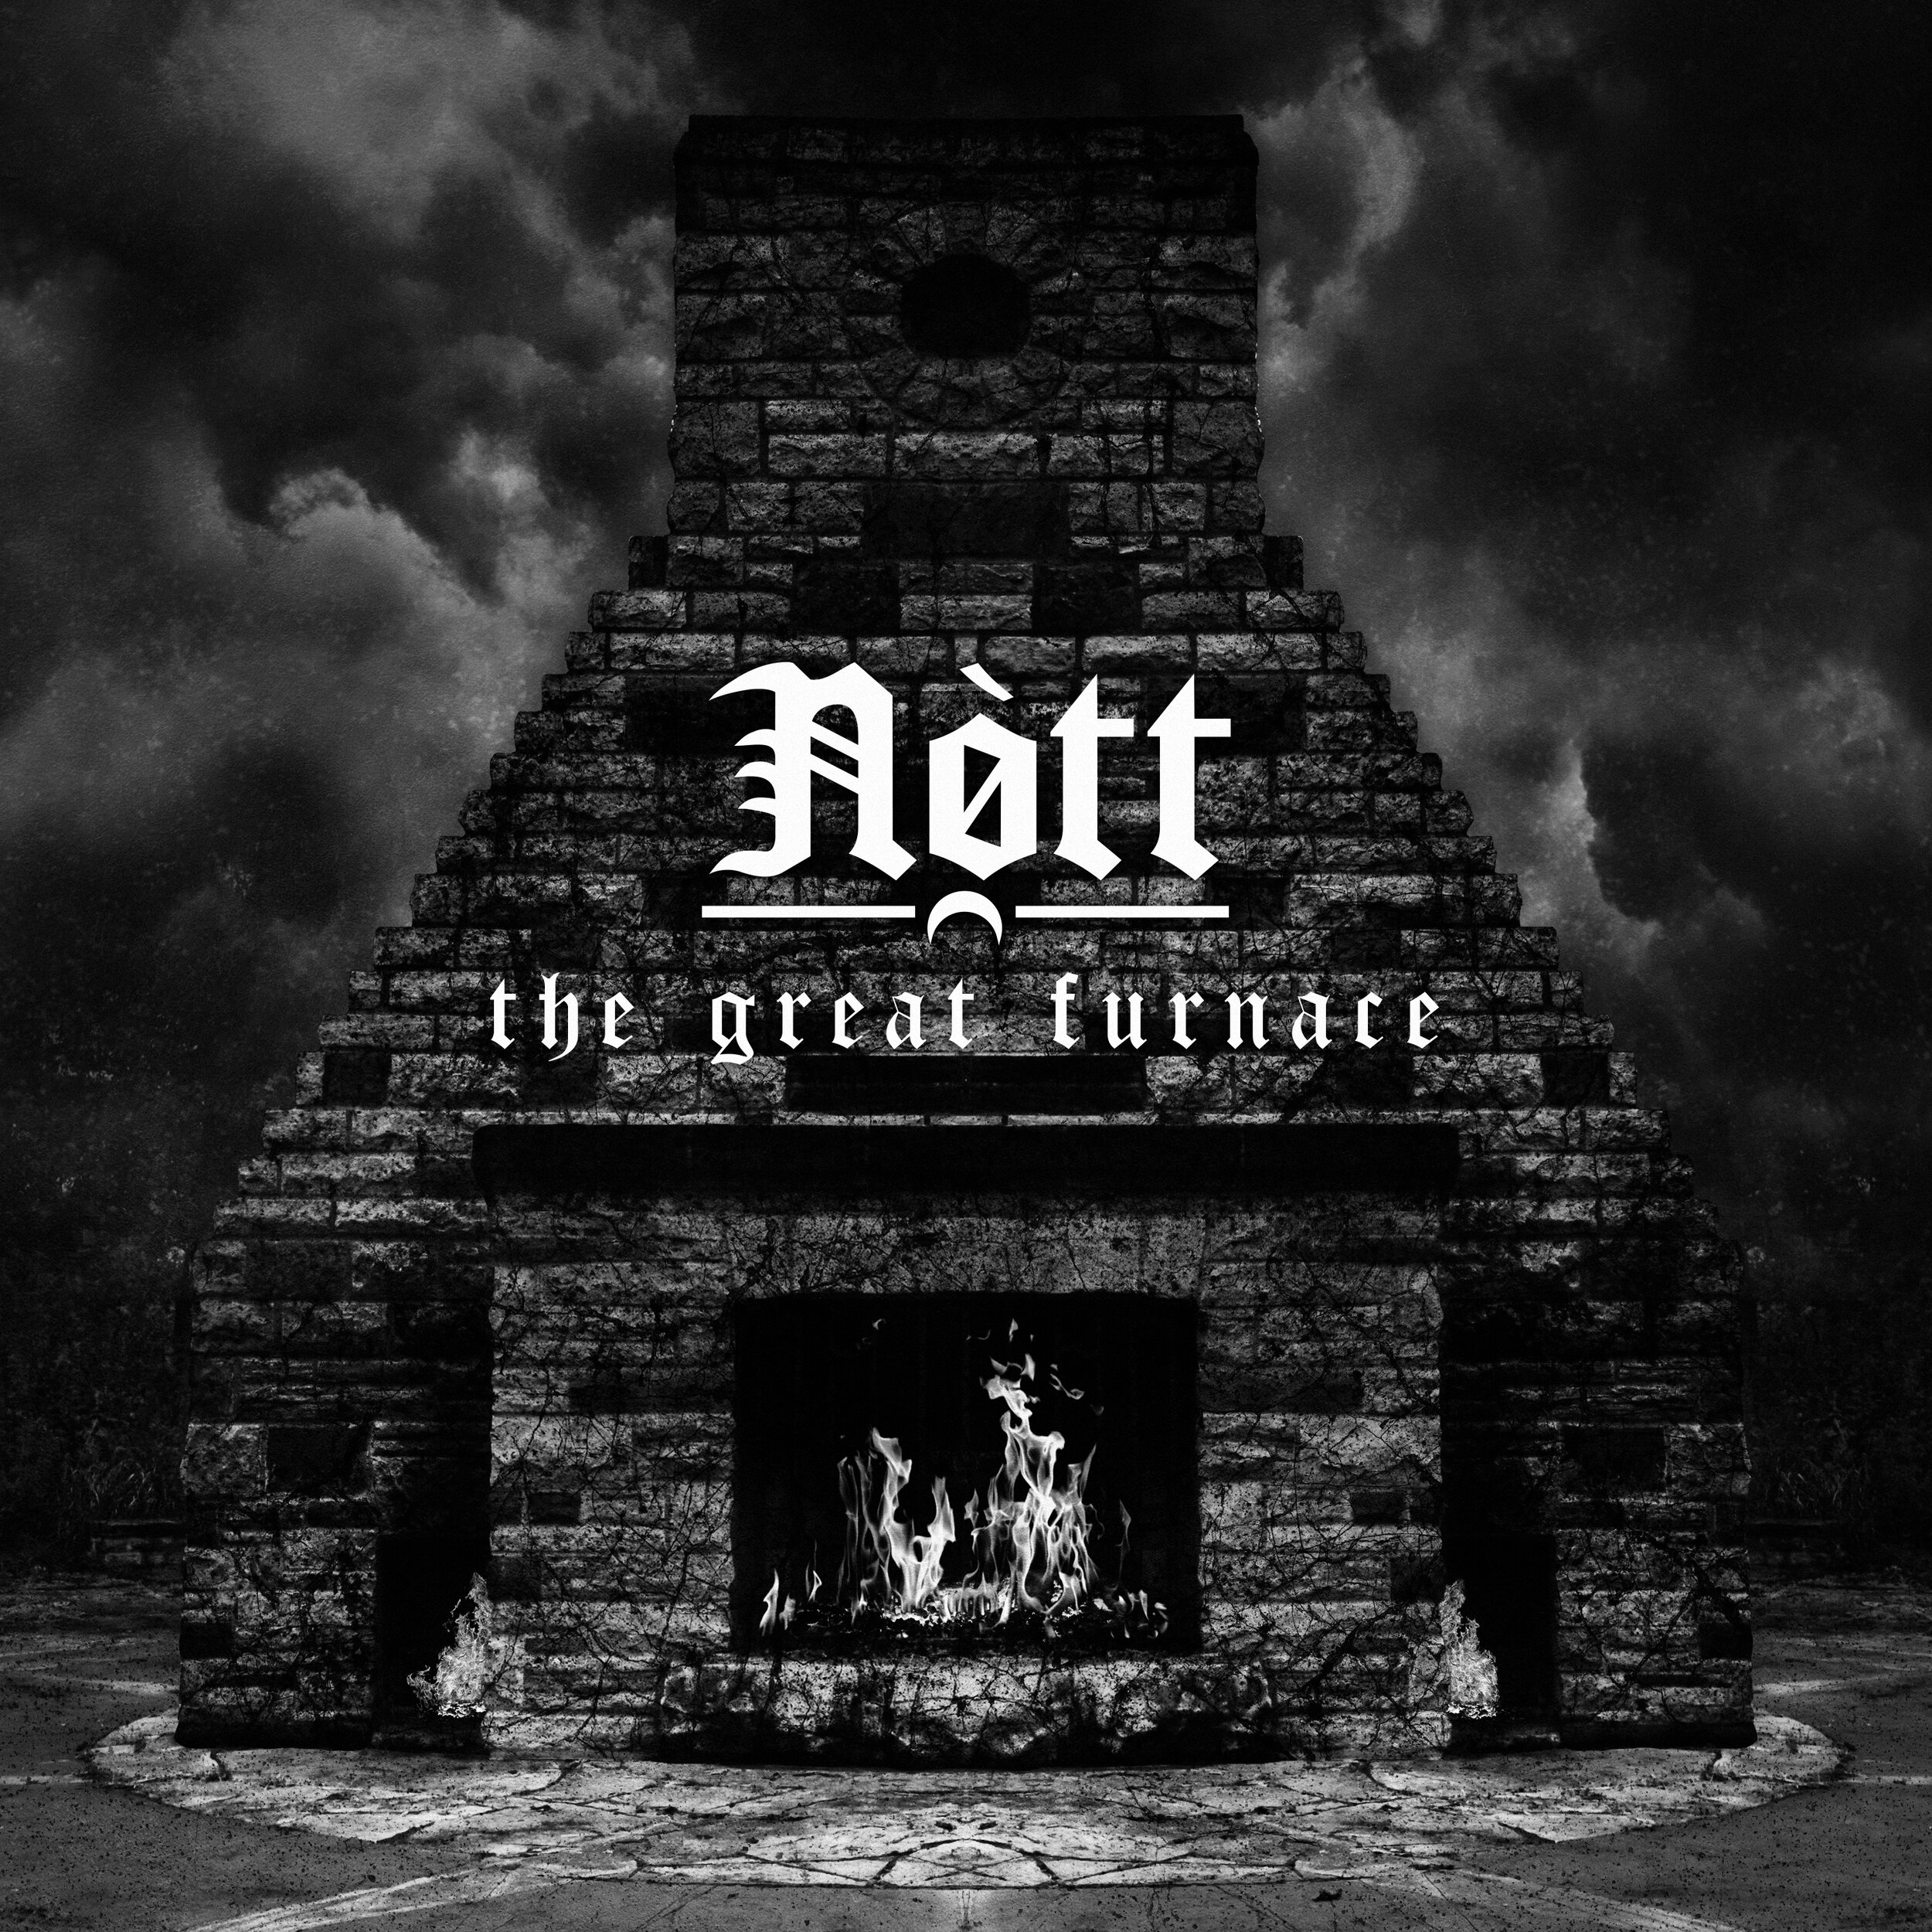 Nòtt - Album Cover 2 The Great Furnace Front.jpg